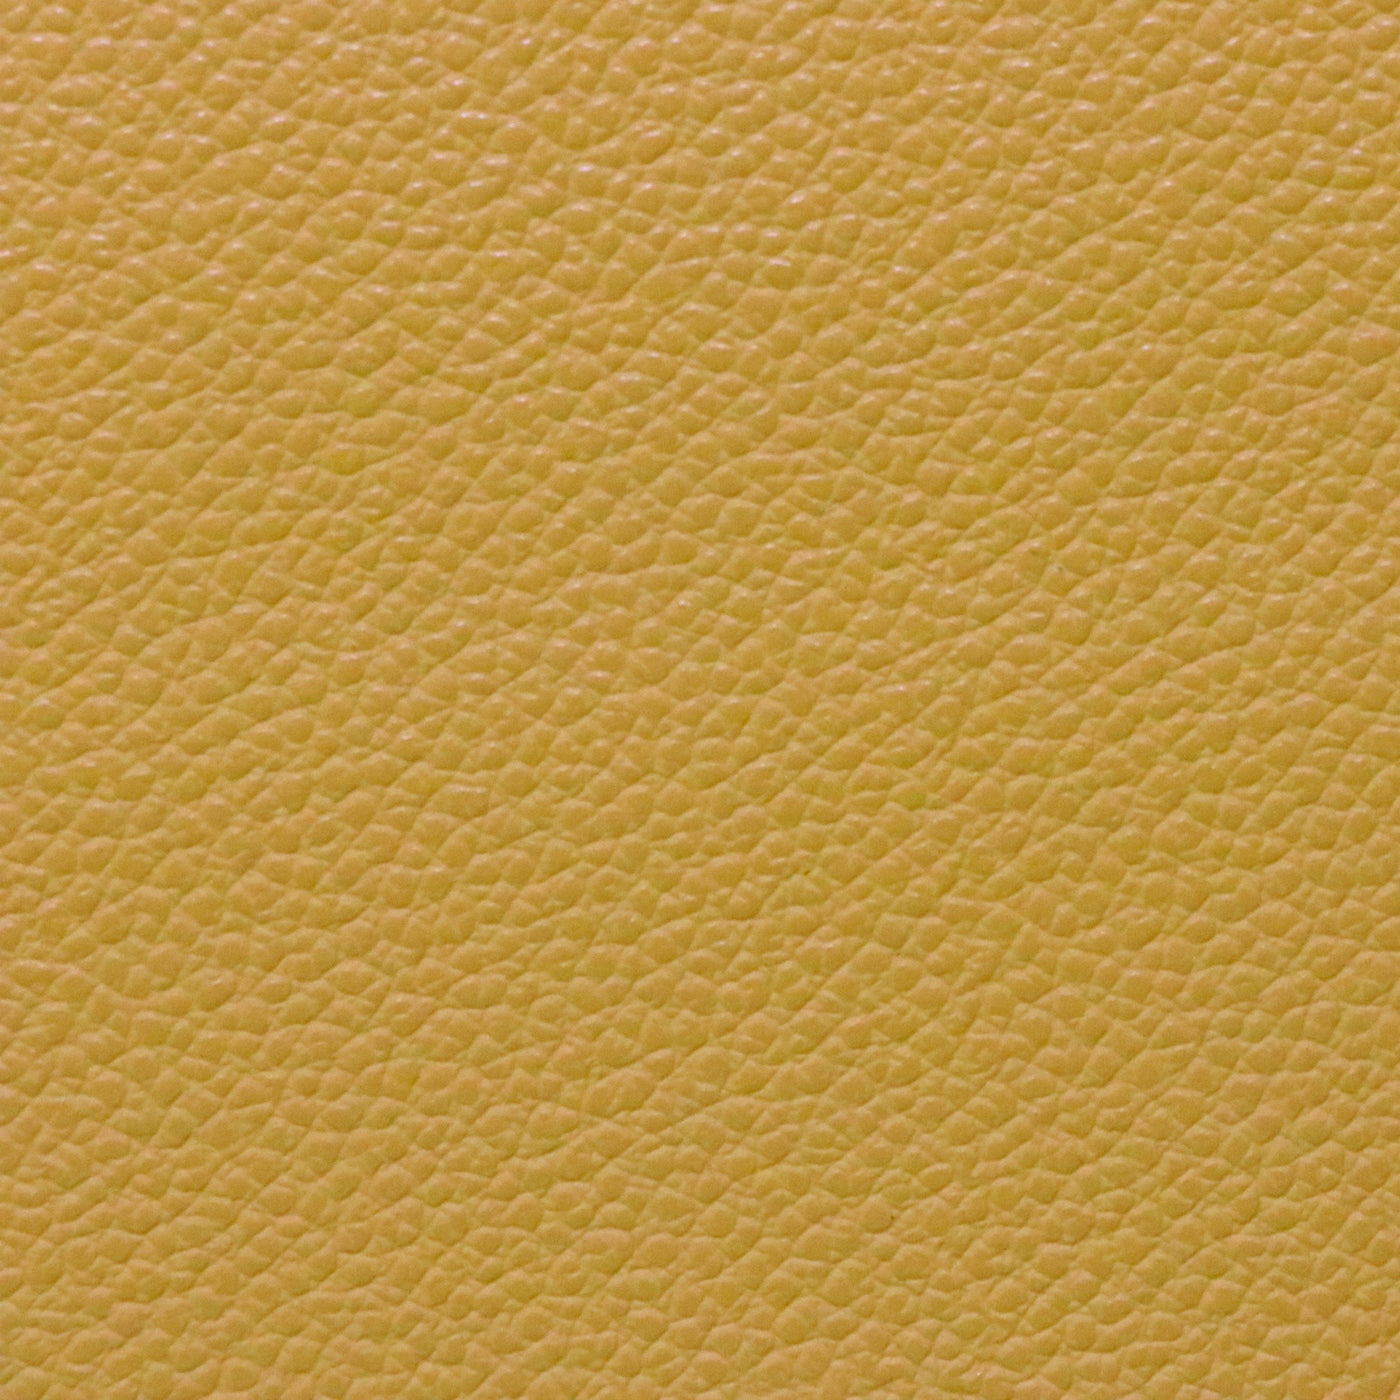 Packaged 1/2 Yard Mustard Pebble Faux Leather